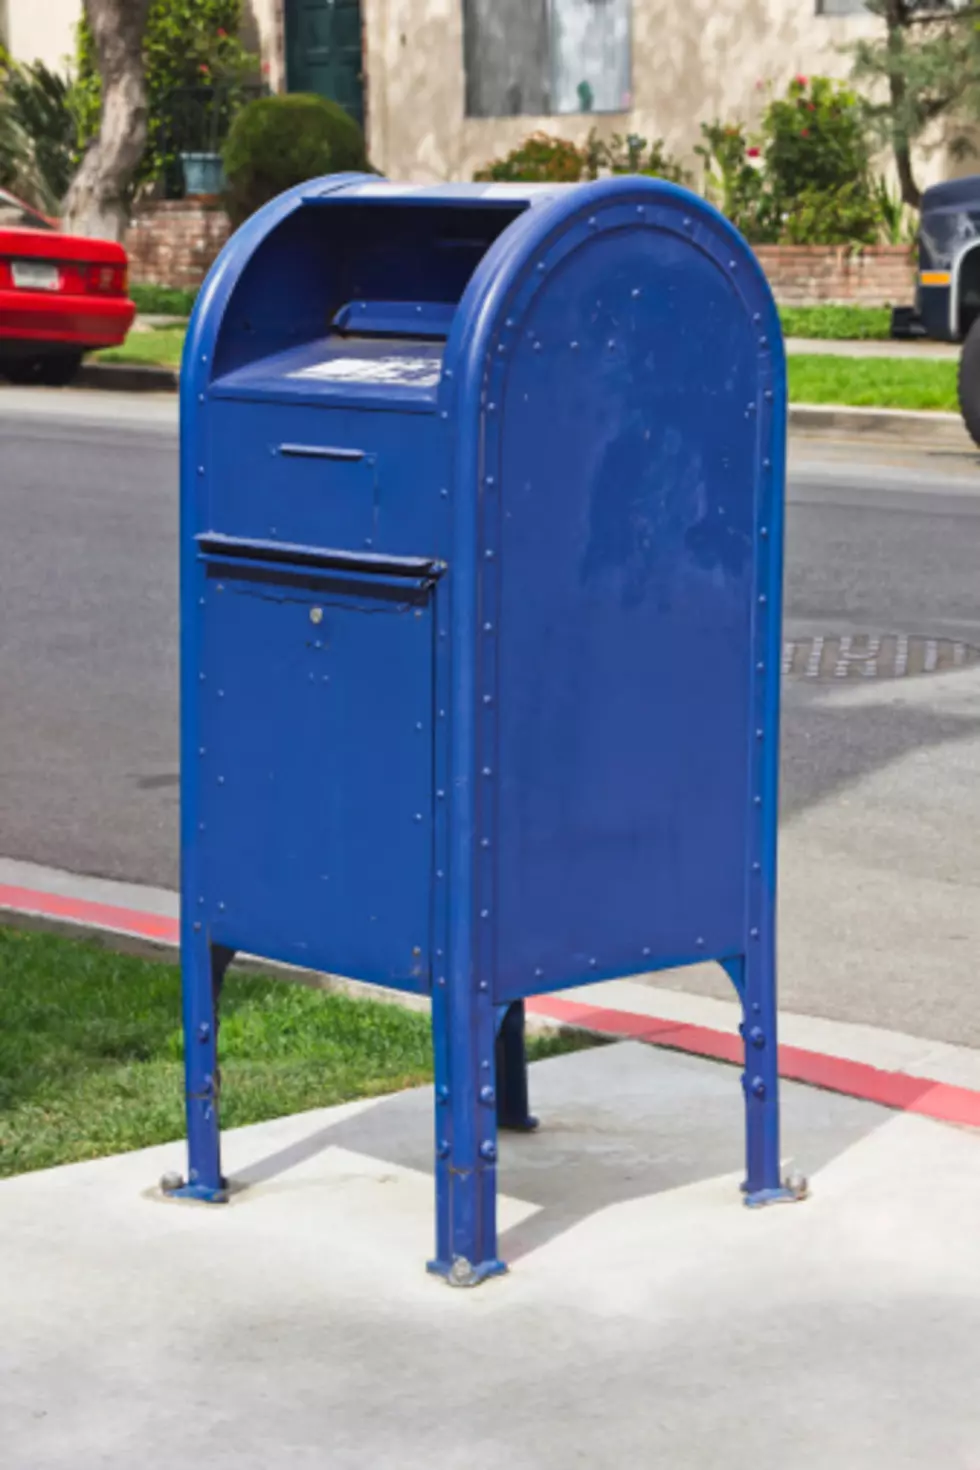 USPS Warns Illinoisans To Stop Using Blue Mailboxes, Here’s Why